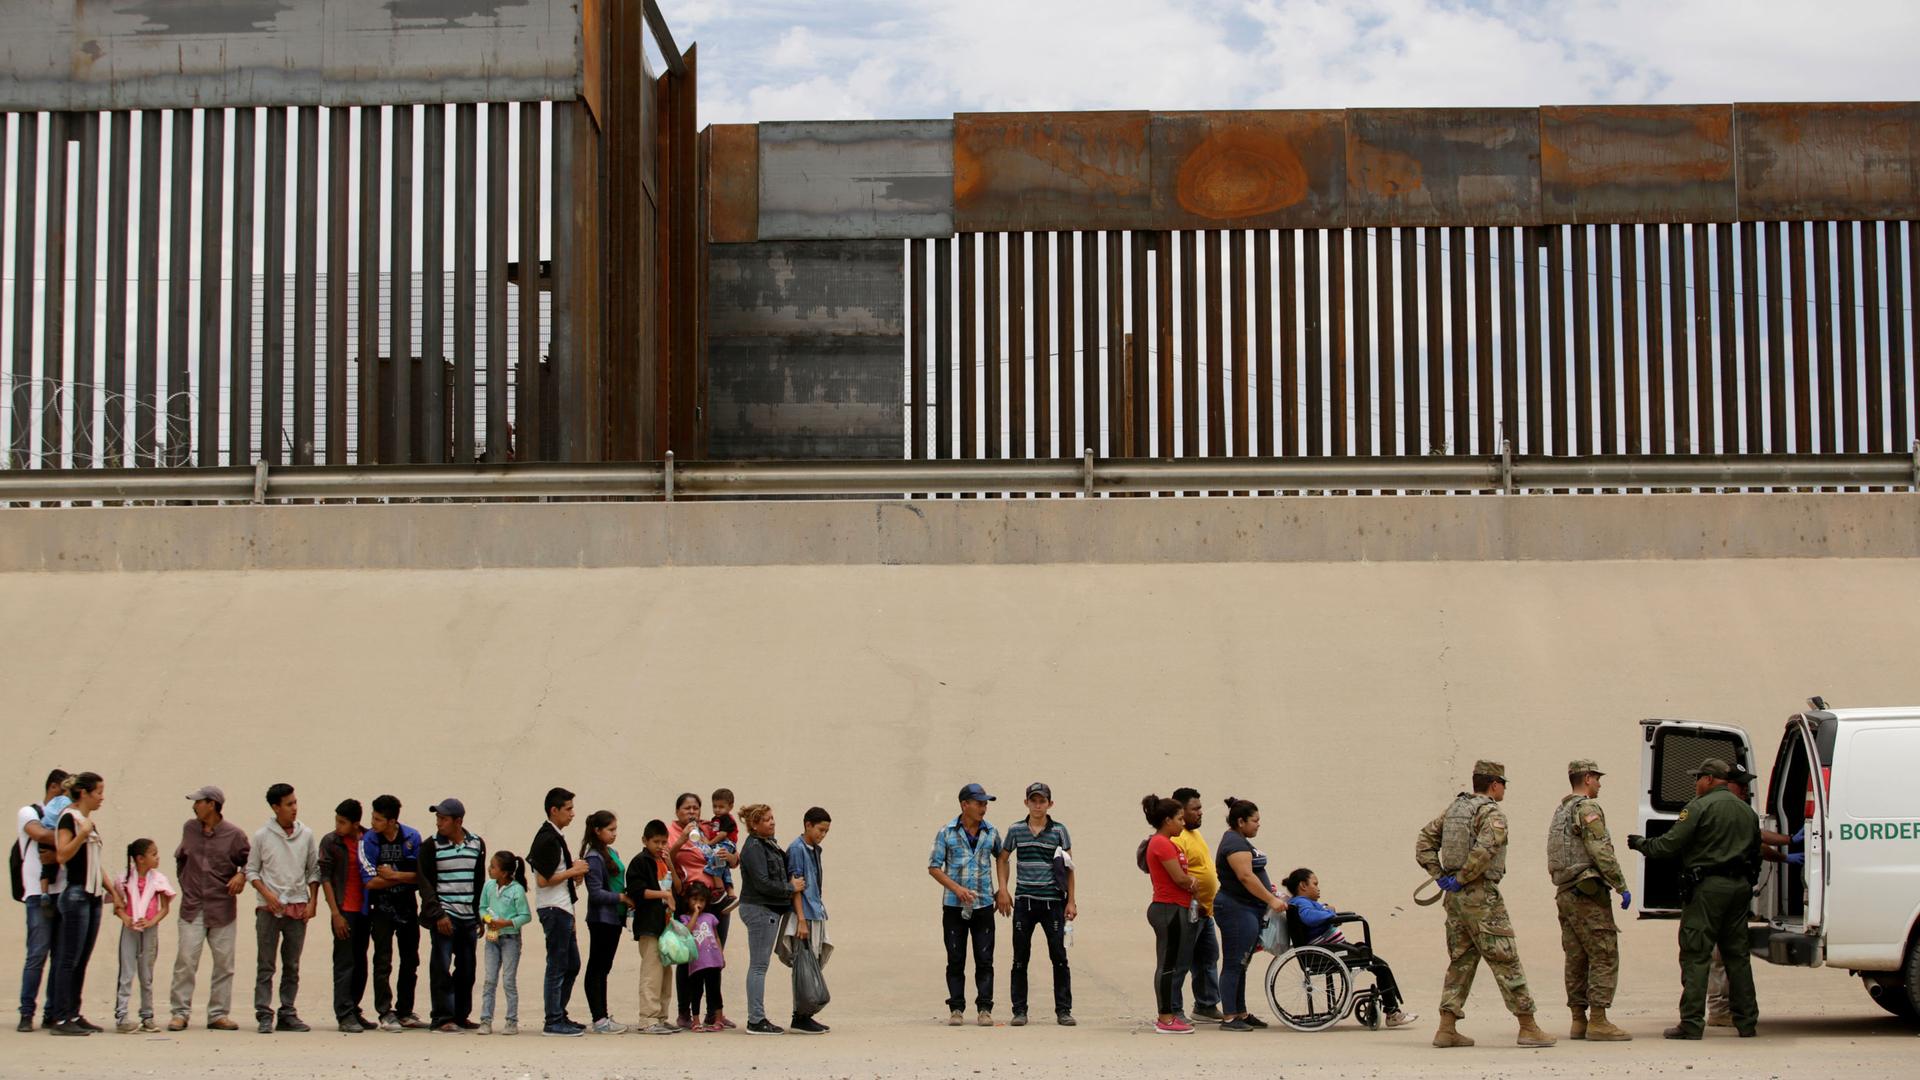 A line of migrants that includes young and older people along with a person in a wheelchair are shown standing next to the large border fence.